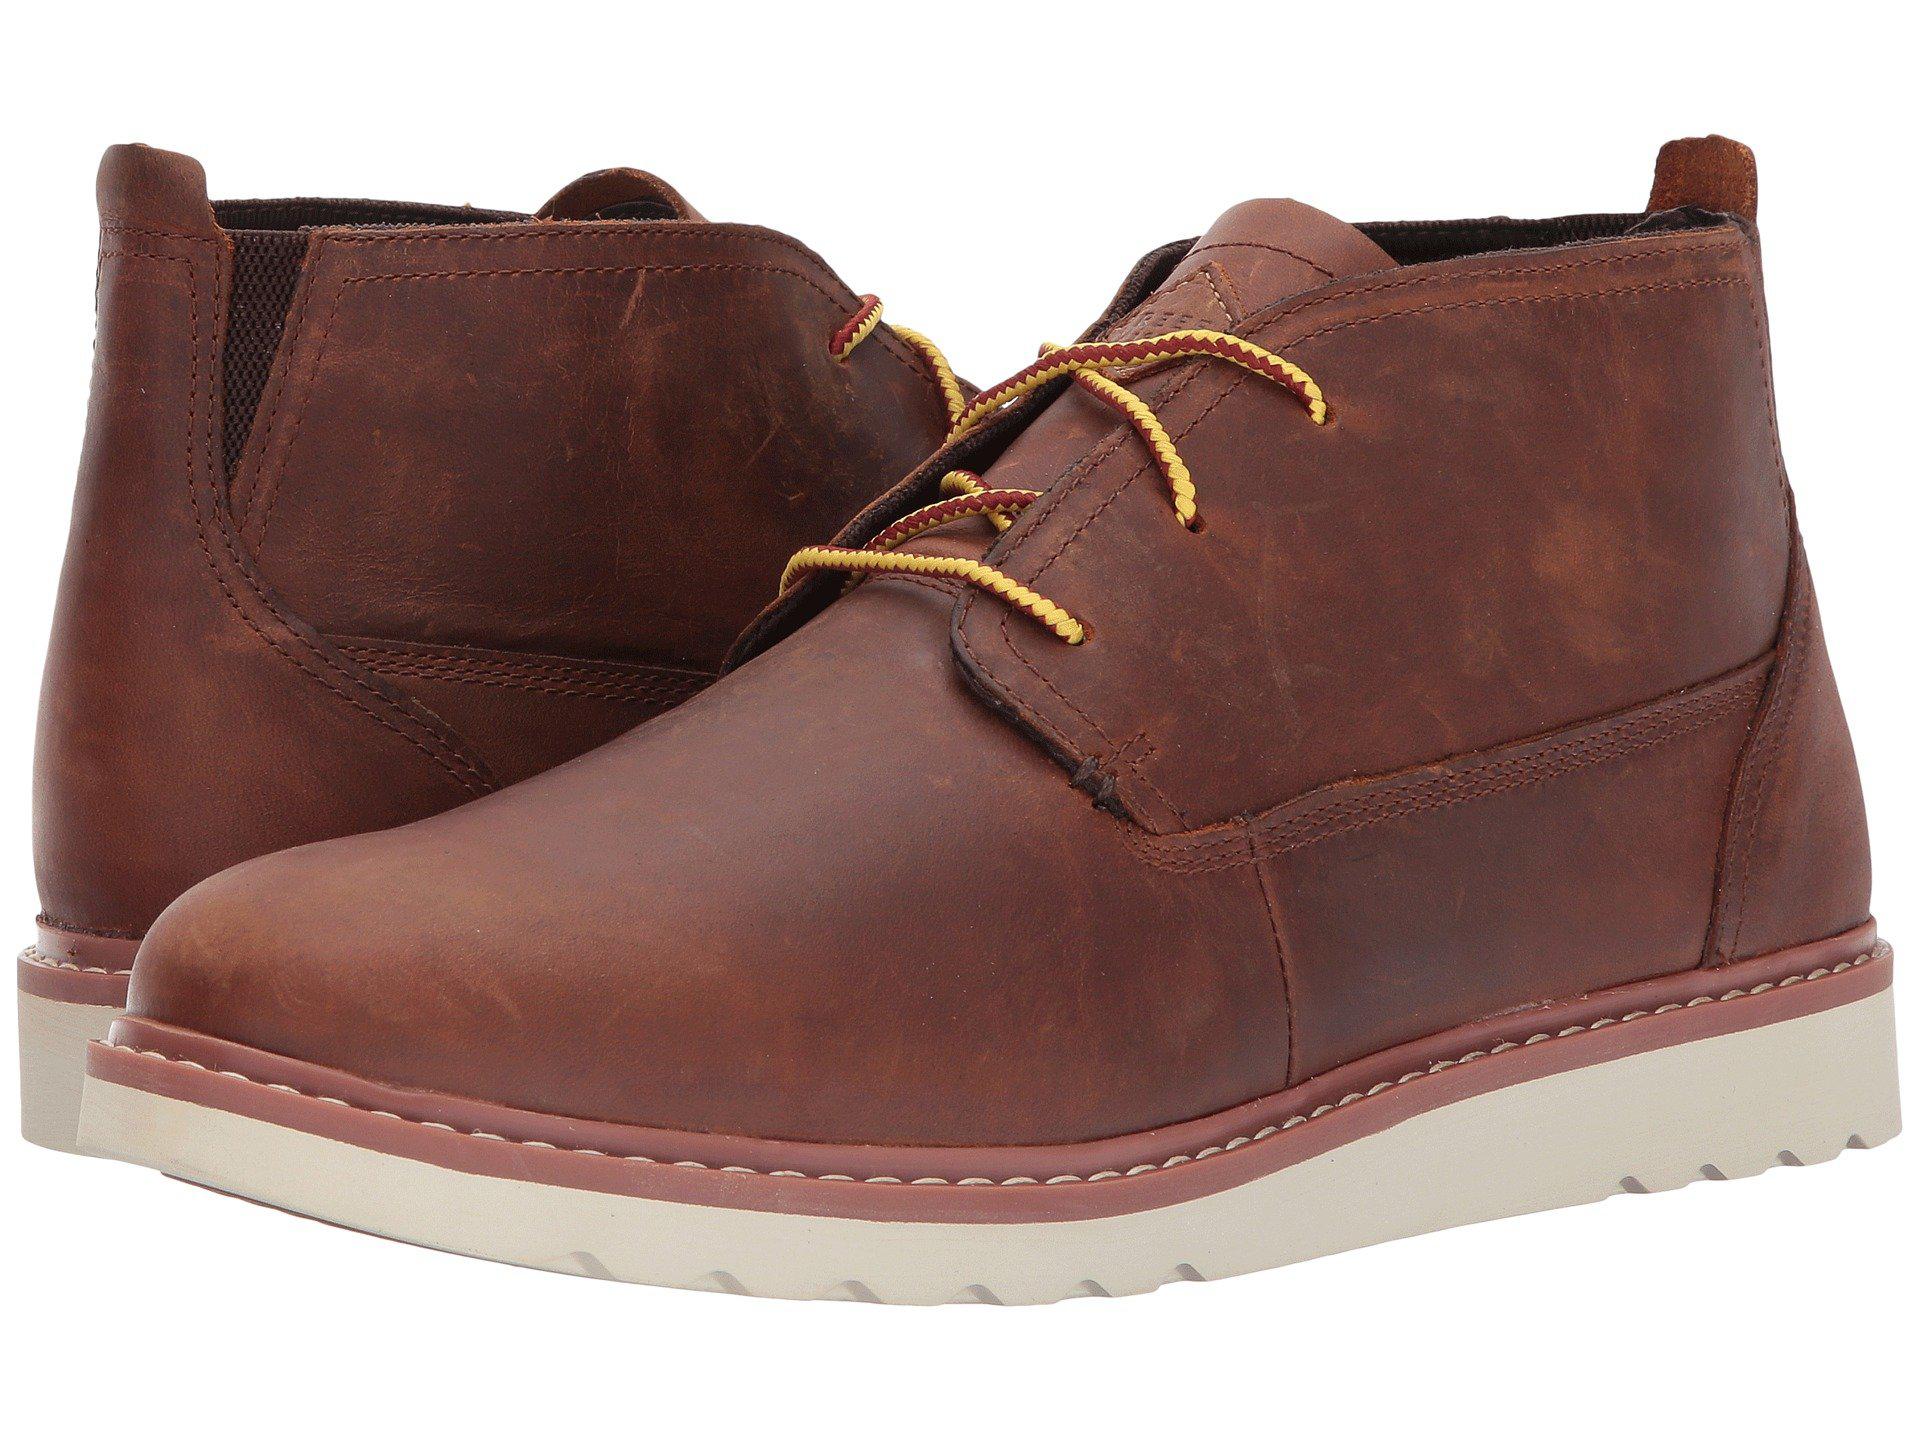 Reef Leather Voyage Boot Le in Brown for Men Lyst